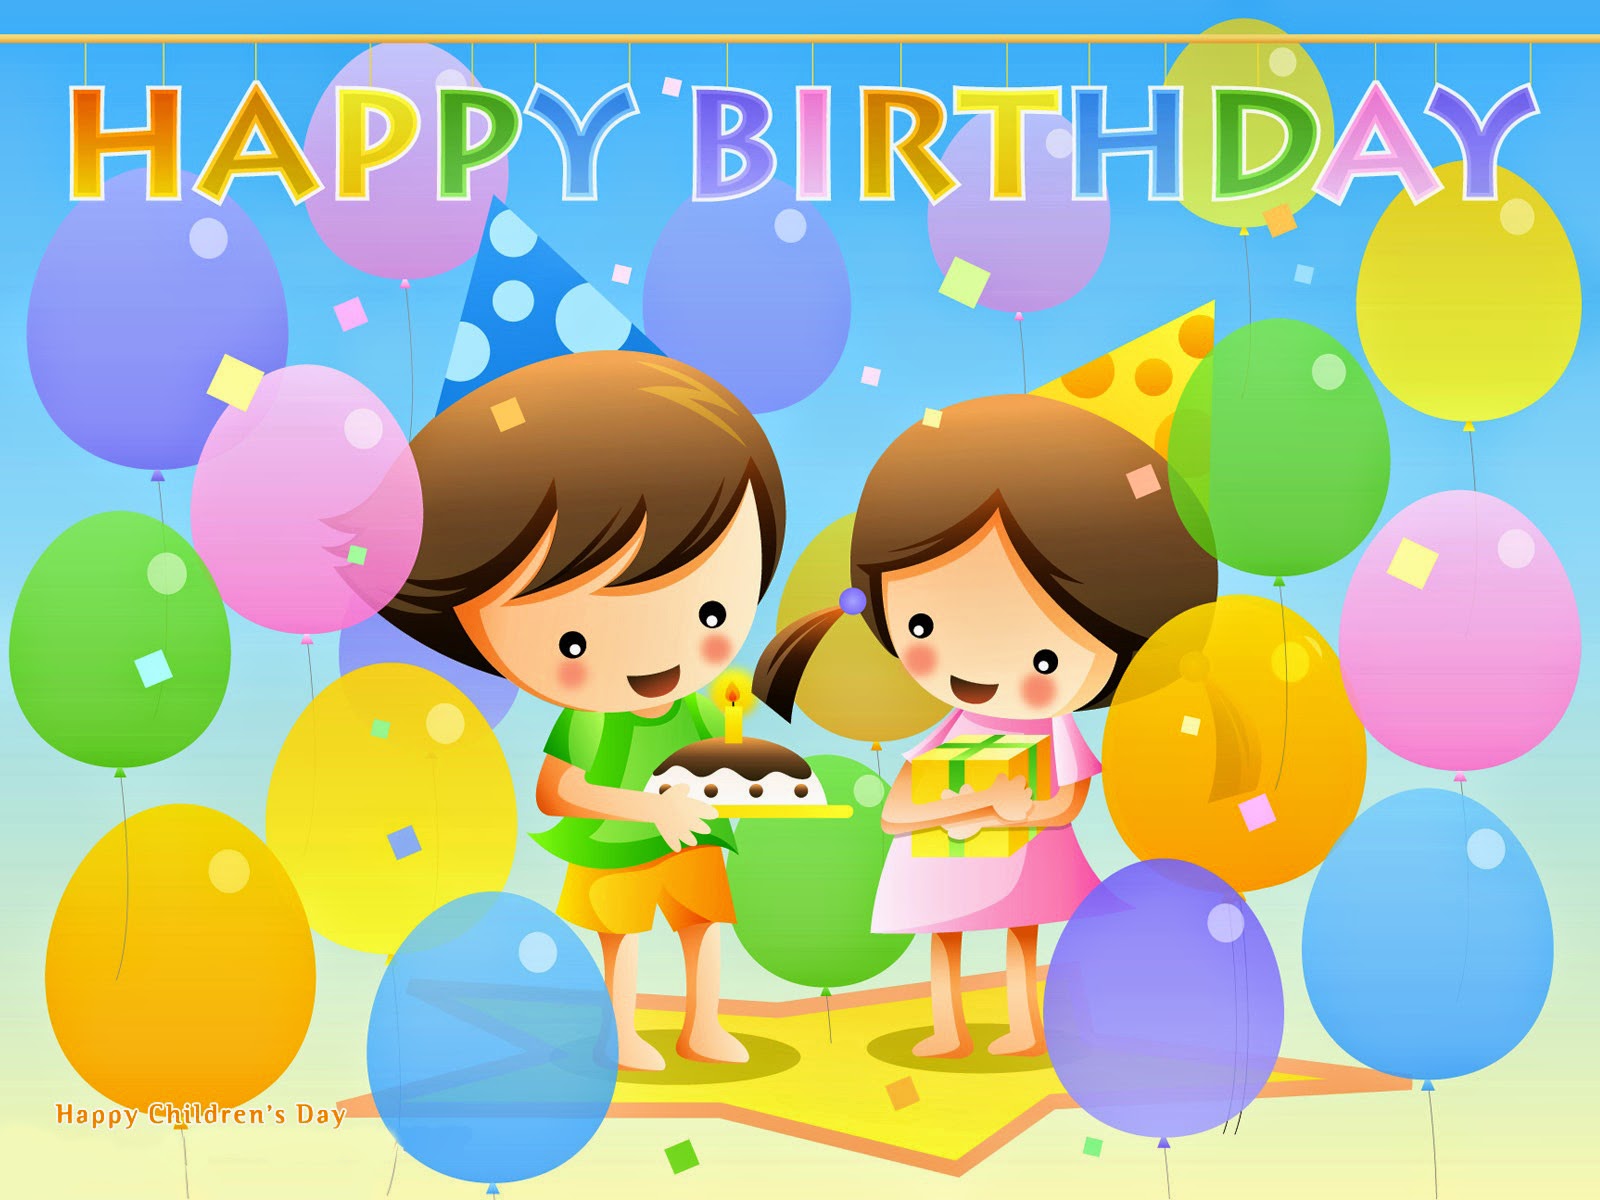 Happy Birthday wishes card images with cakes, candles picture for 